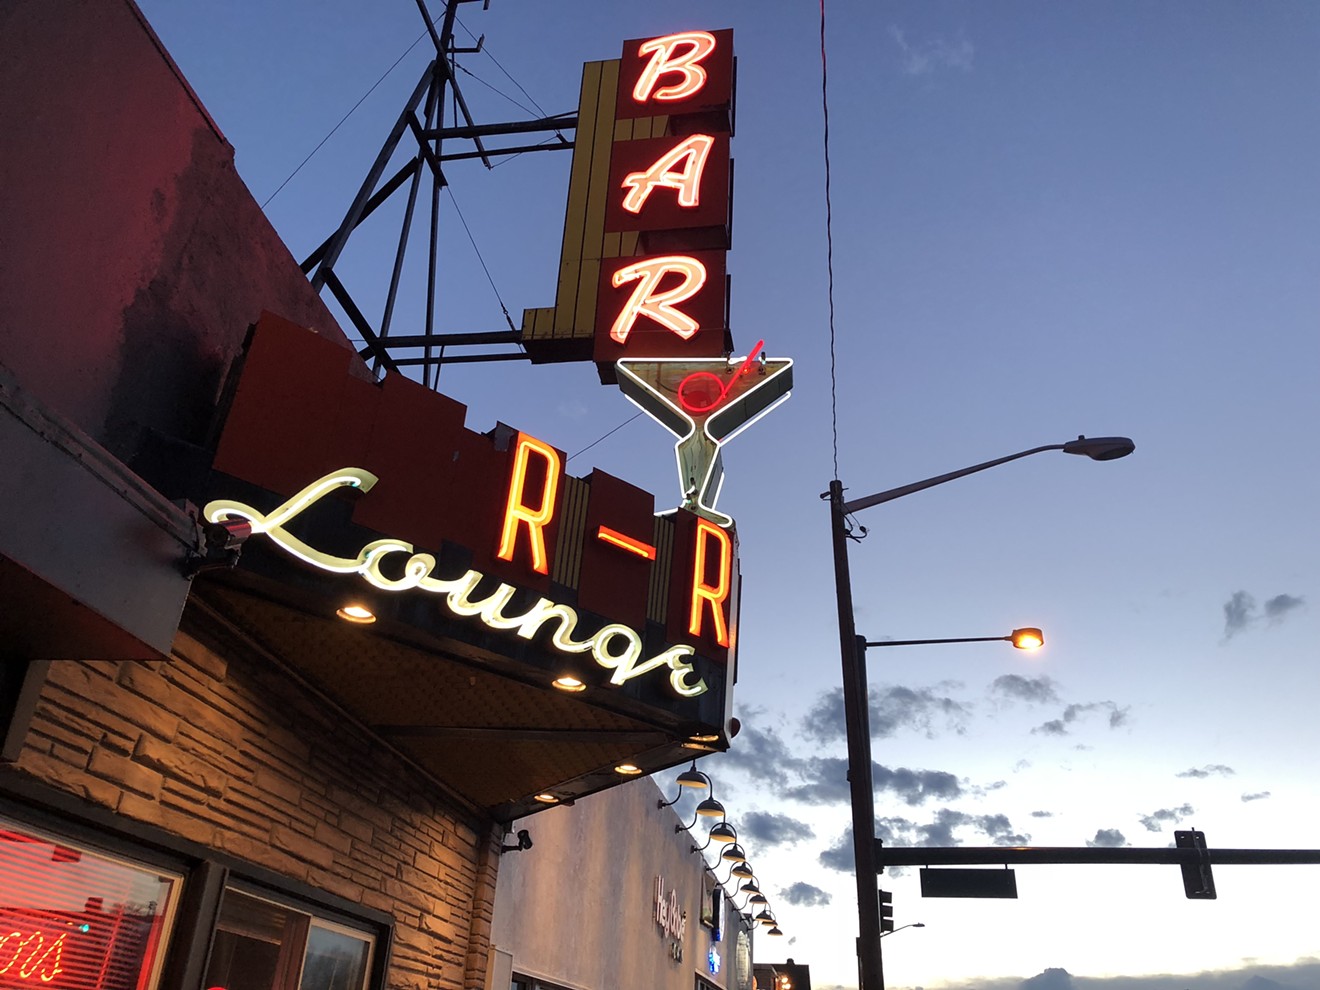 It's always a beautiful evening on Colfax at the R&R Lounge.